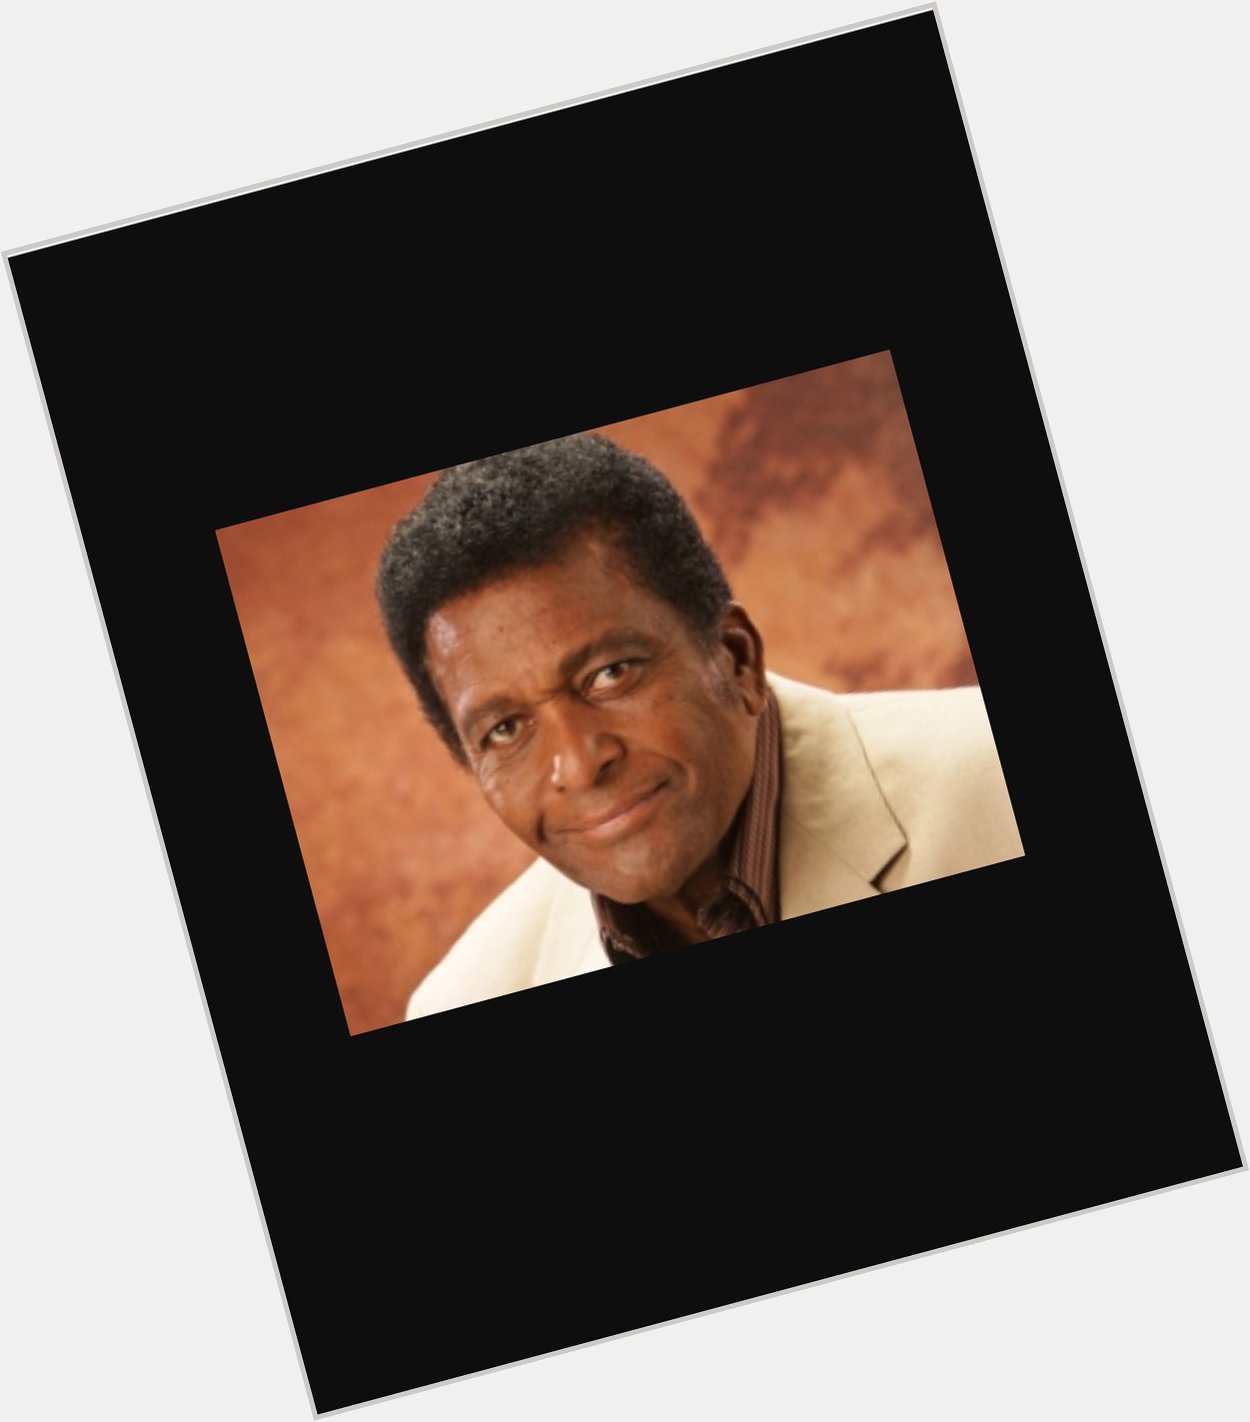 Happy birthday to one of the greatest singers ever Charley Pride. 